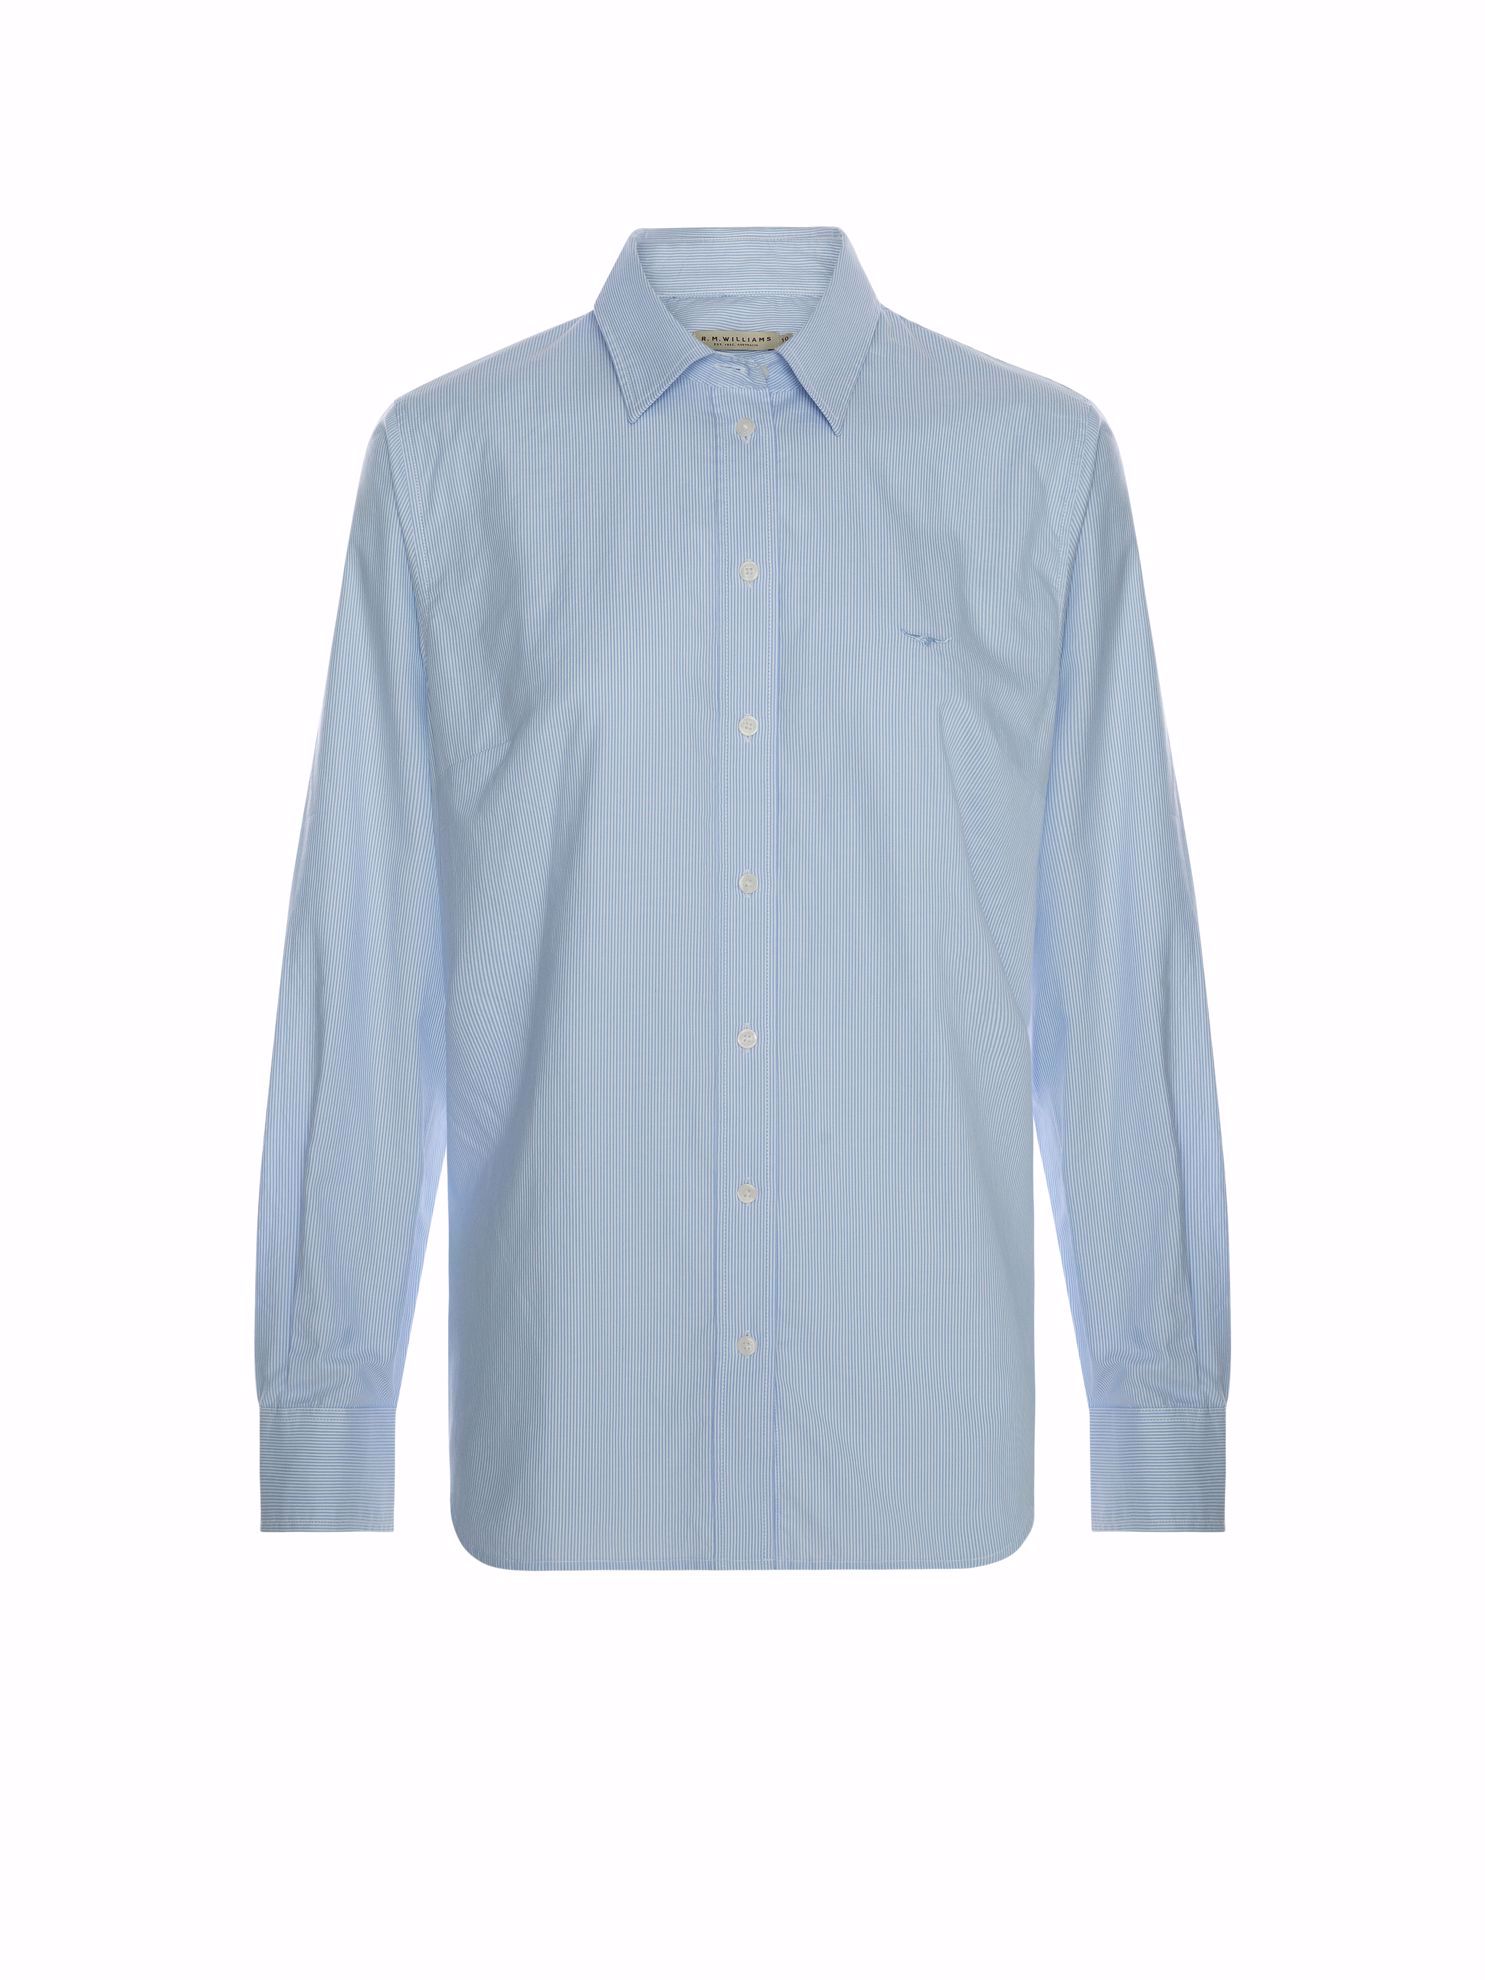 Boots Online. RM Williams Nicole Shirt